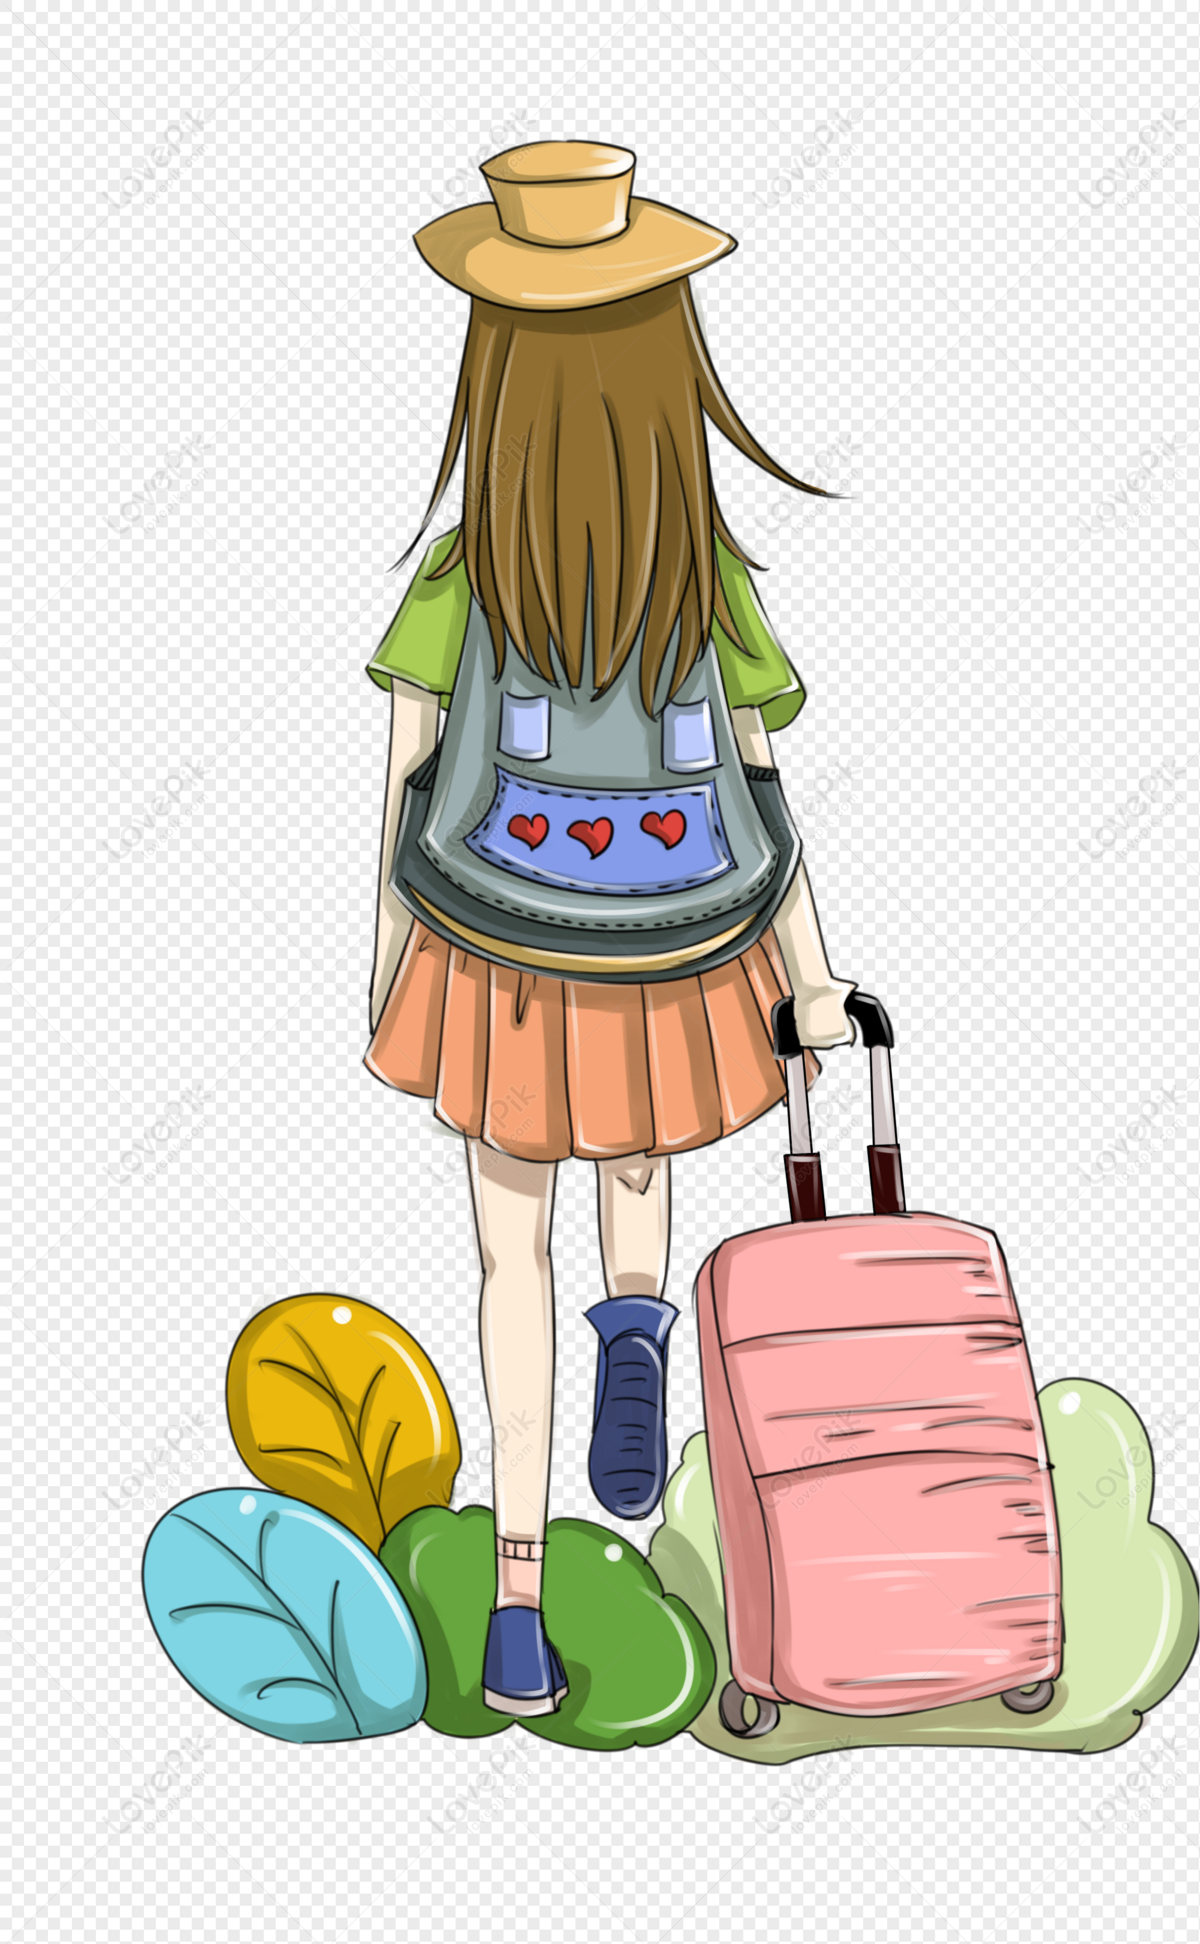 Girl traveling with luggage, travel luggage, travel, travel bag png transparent background